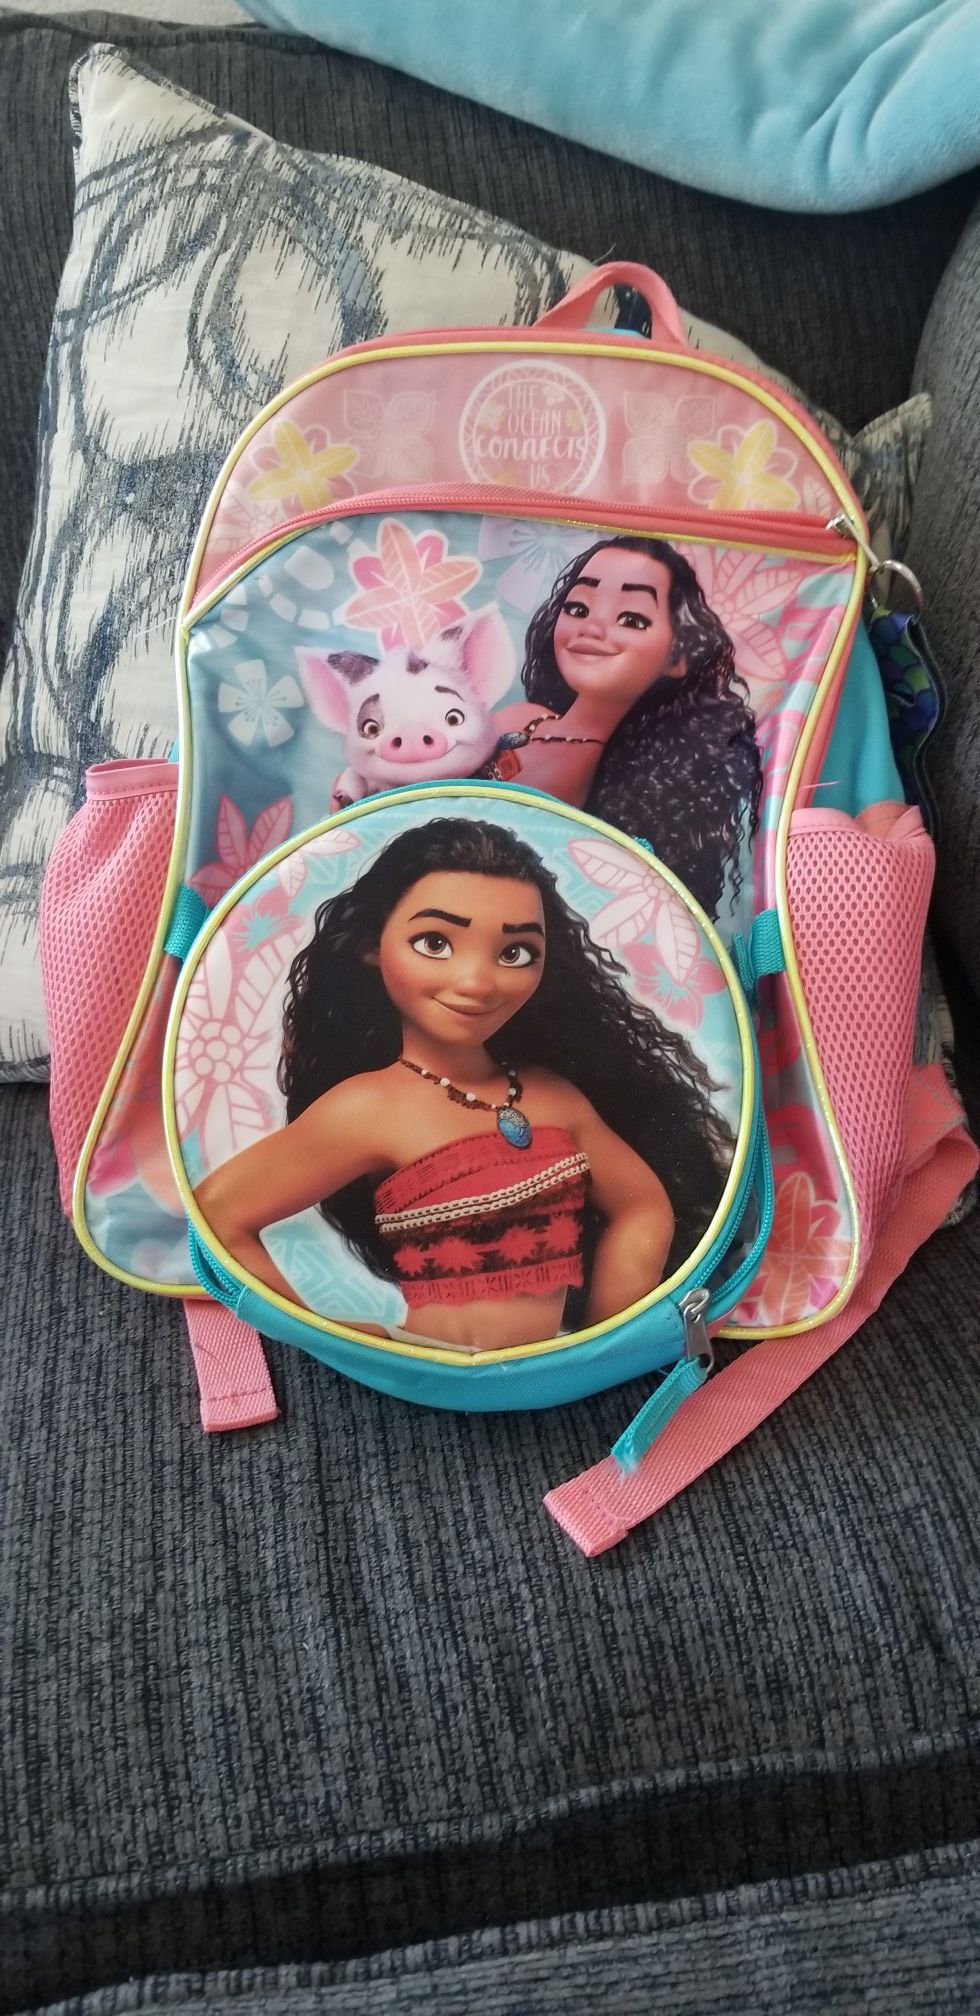 Brand new moana backpack with lunch box